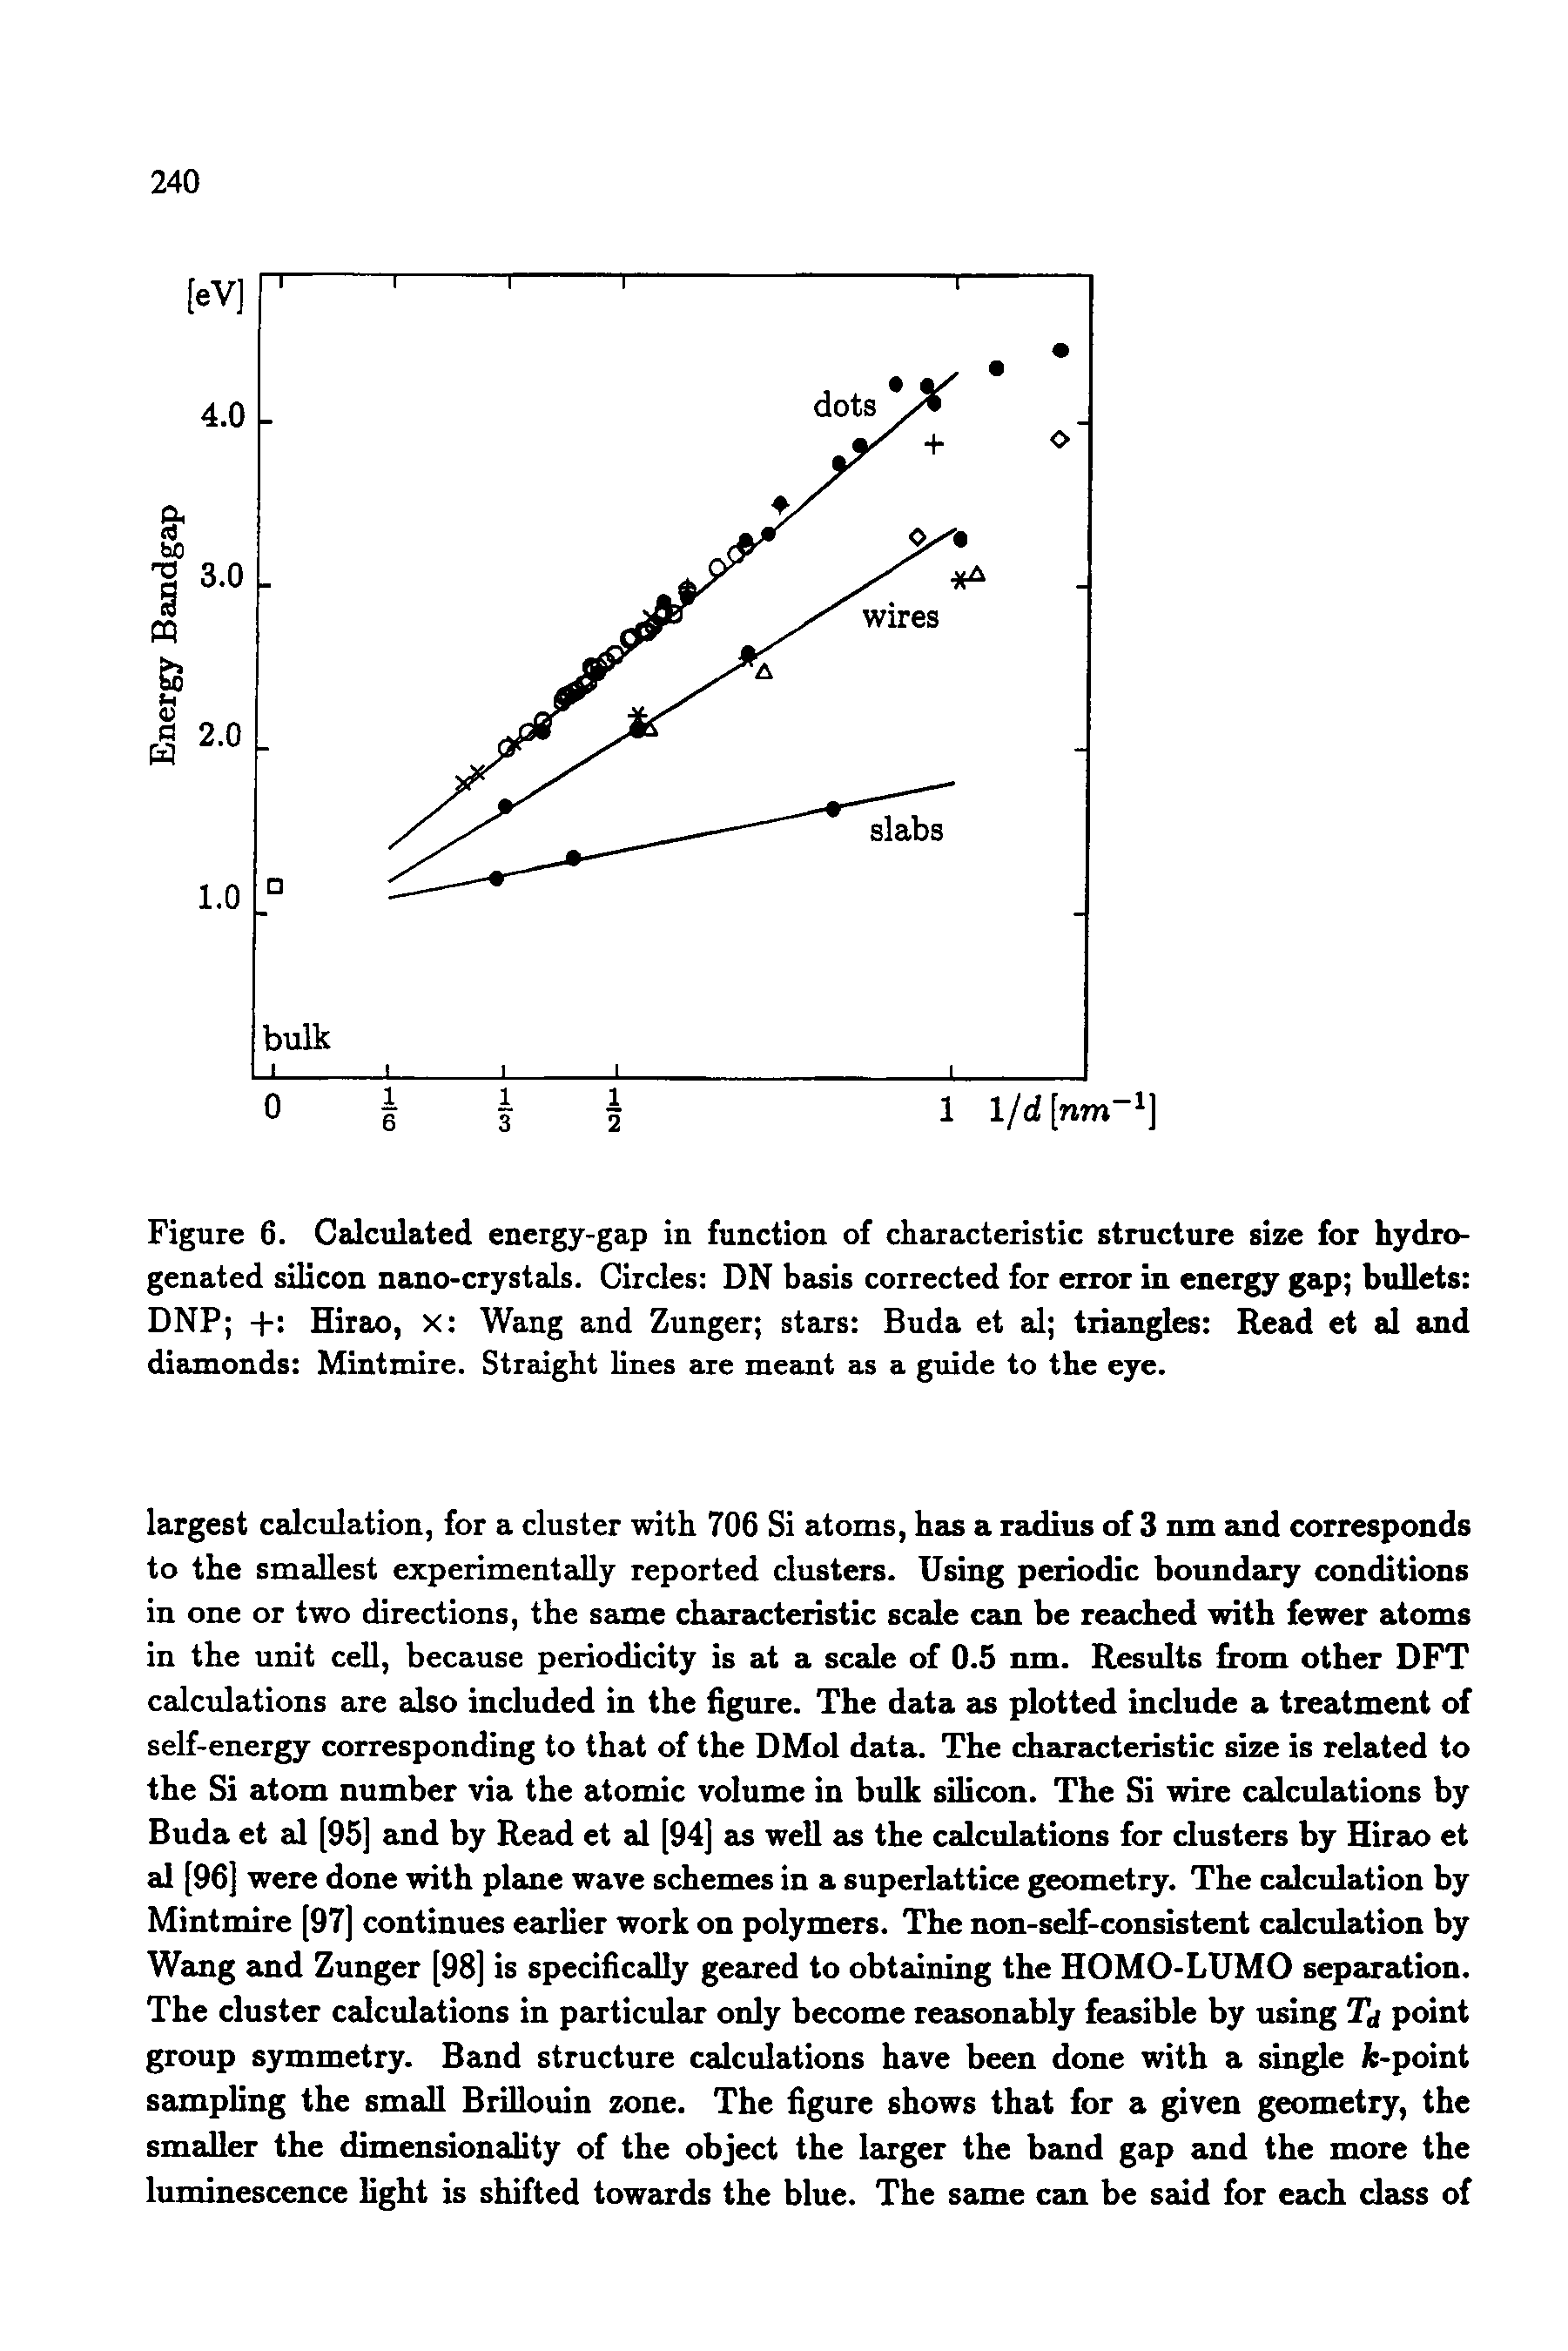 Figure 6. Calculated energy-gap in function of characteristic structure size for hydrogenated silicon nano-crystals. Circles DN basis corrected for error in energy gap bullets DNP + Hirao, x Wang and Zunger stars Buda et al triangles Read et al and diamonds Mintmire. Straight lines are meant as a guide to the eye.